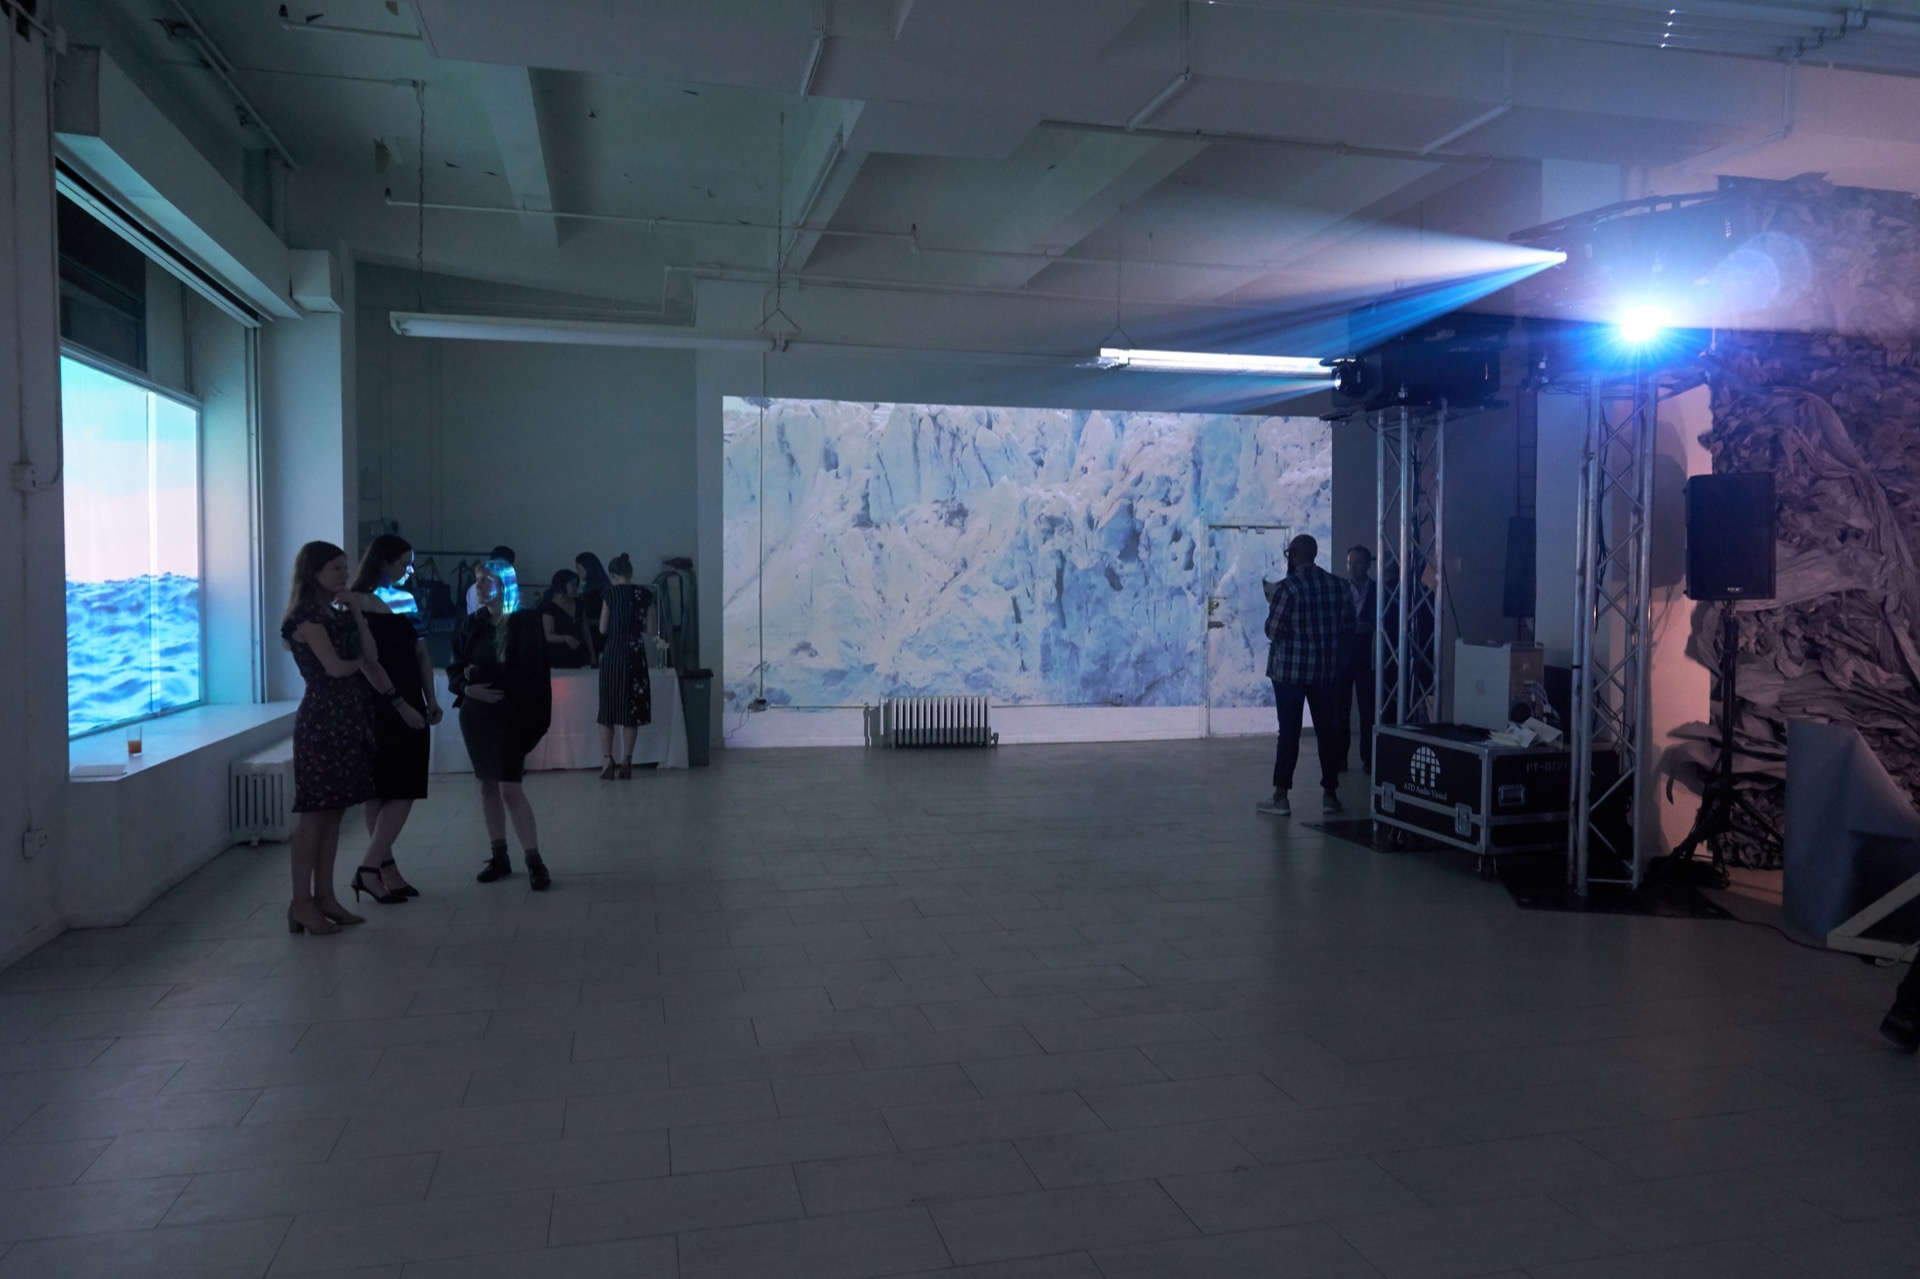 Wide shot of the inside of a gallery showing two different projected works. On the left, an image of a body of water is projected into the gallery windows. Straight back, an image of an Arctic scene—close up of a glacier—is projected. There are about a dozen people in cocktail attire milling about. On the right, a two sharply bright lights are emanating from the lens of large projectors.